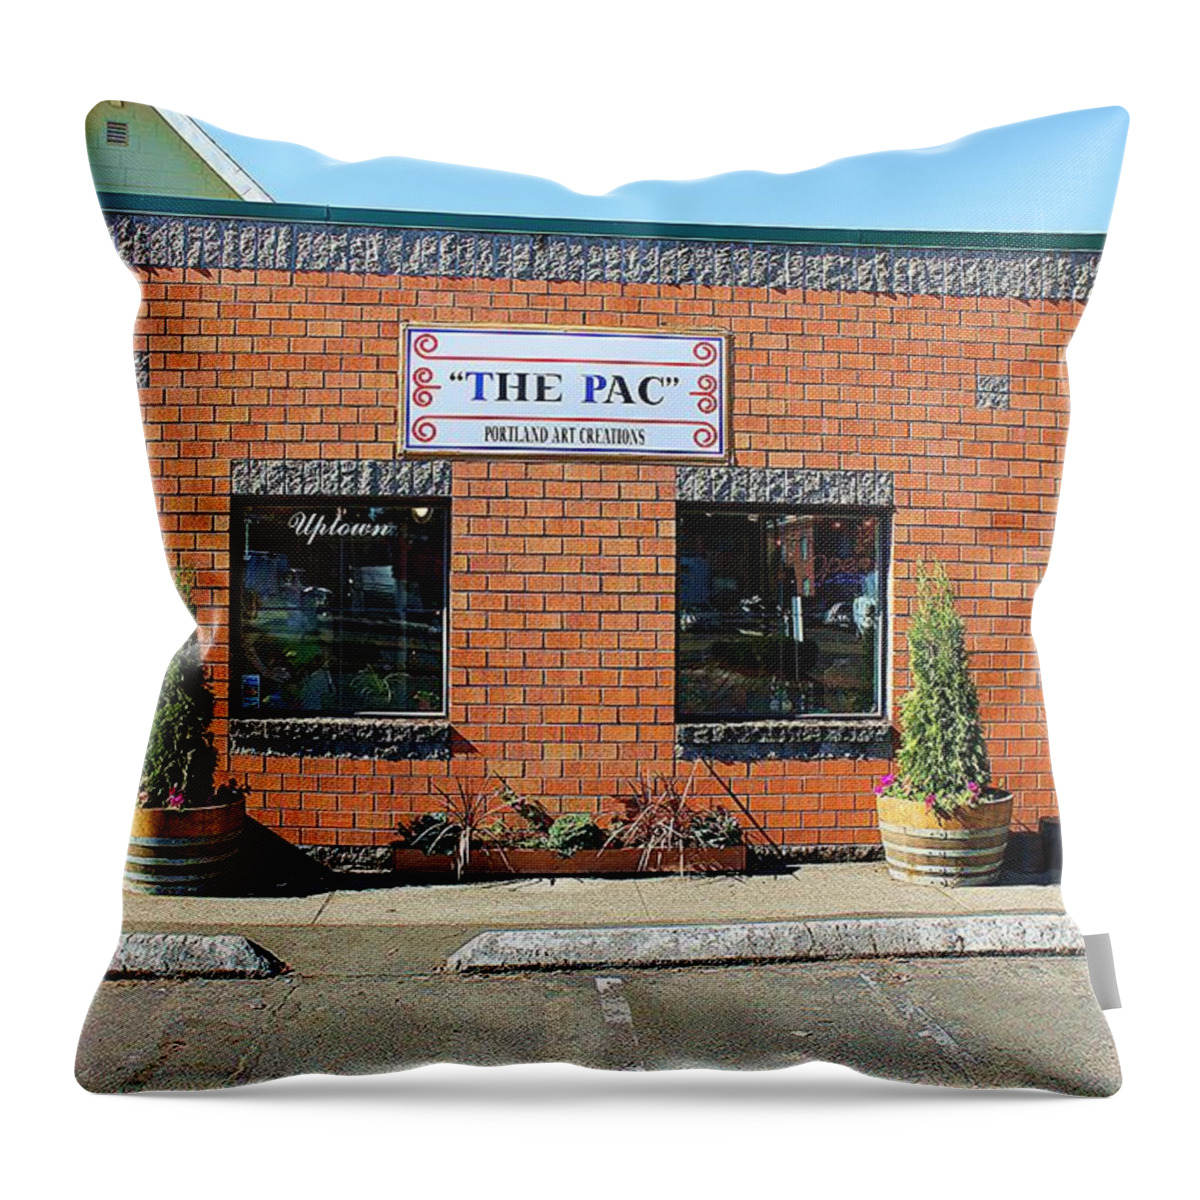  Throw Pillow featuring the painting Portland Art Creations #2 by James Dunbar